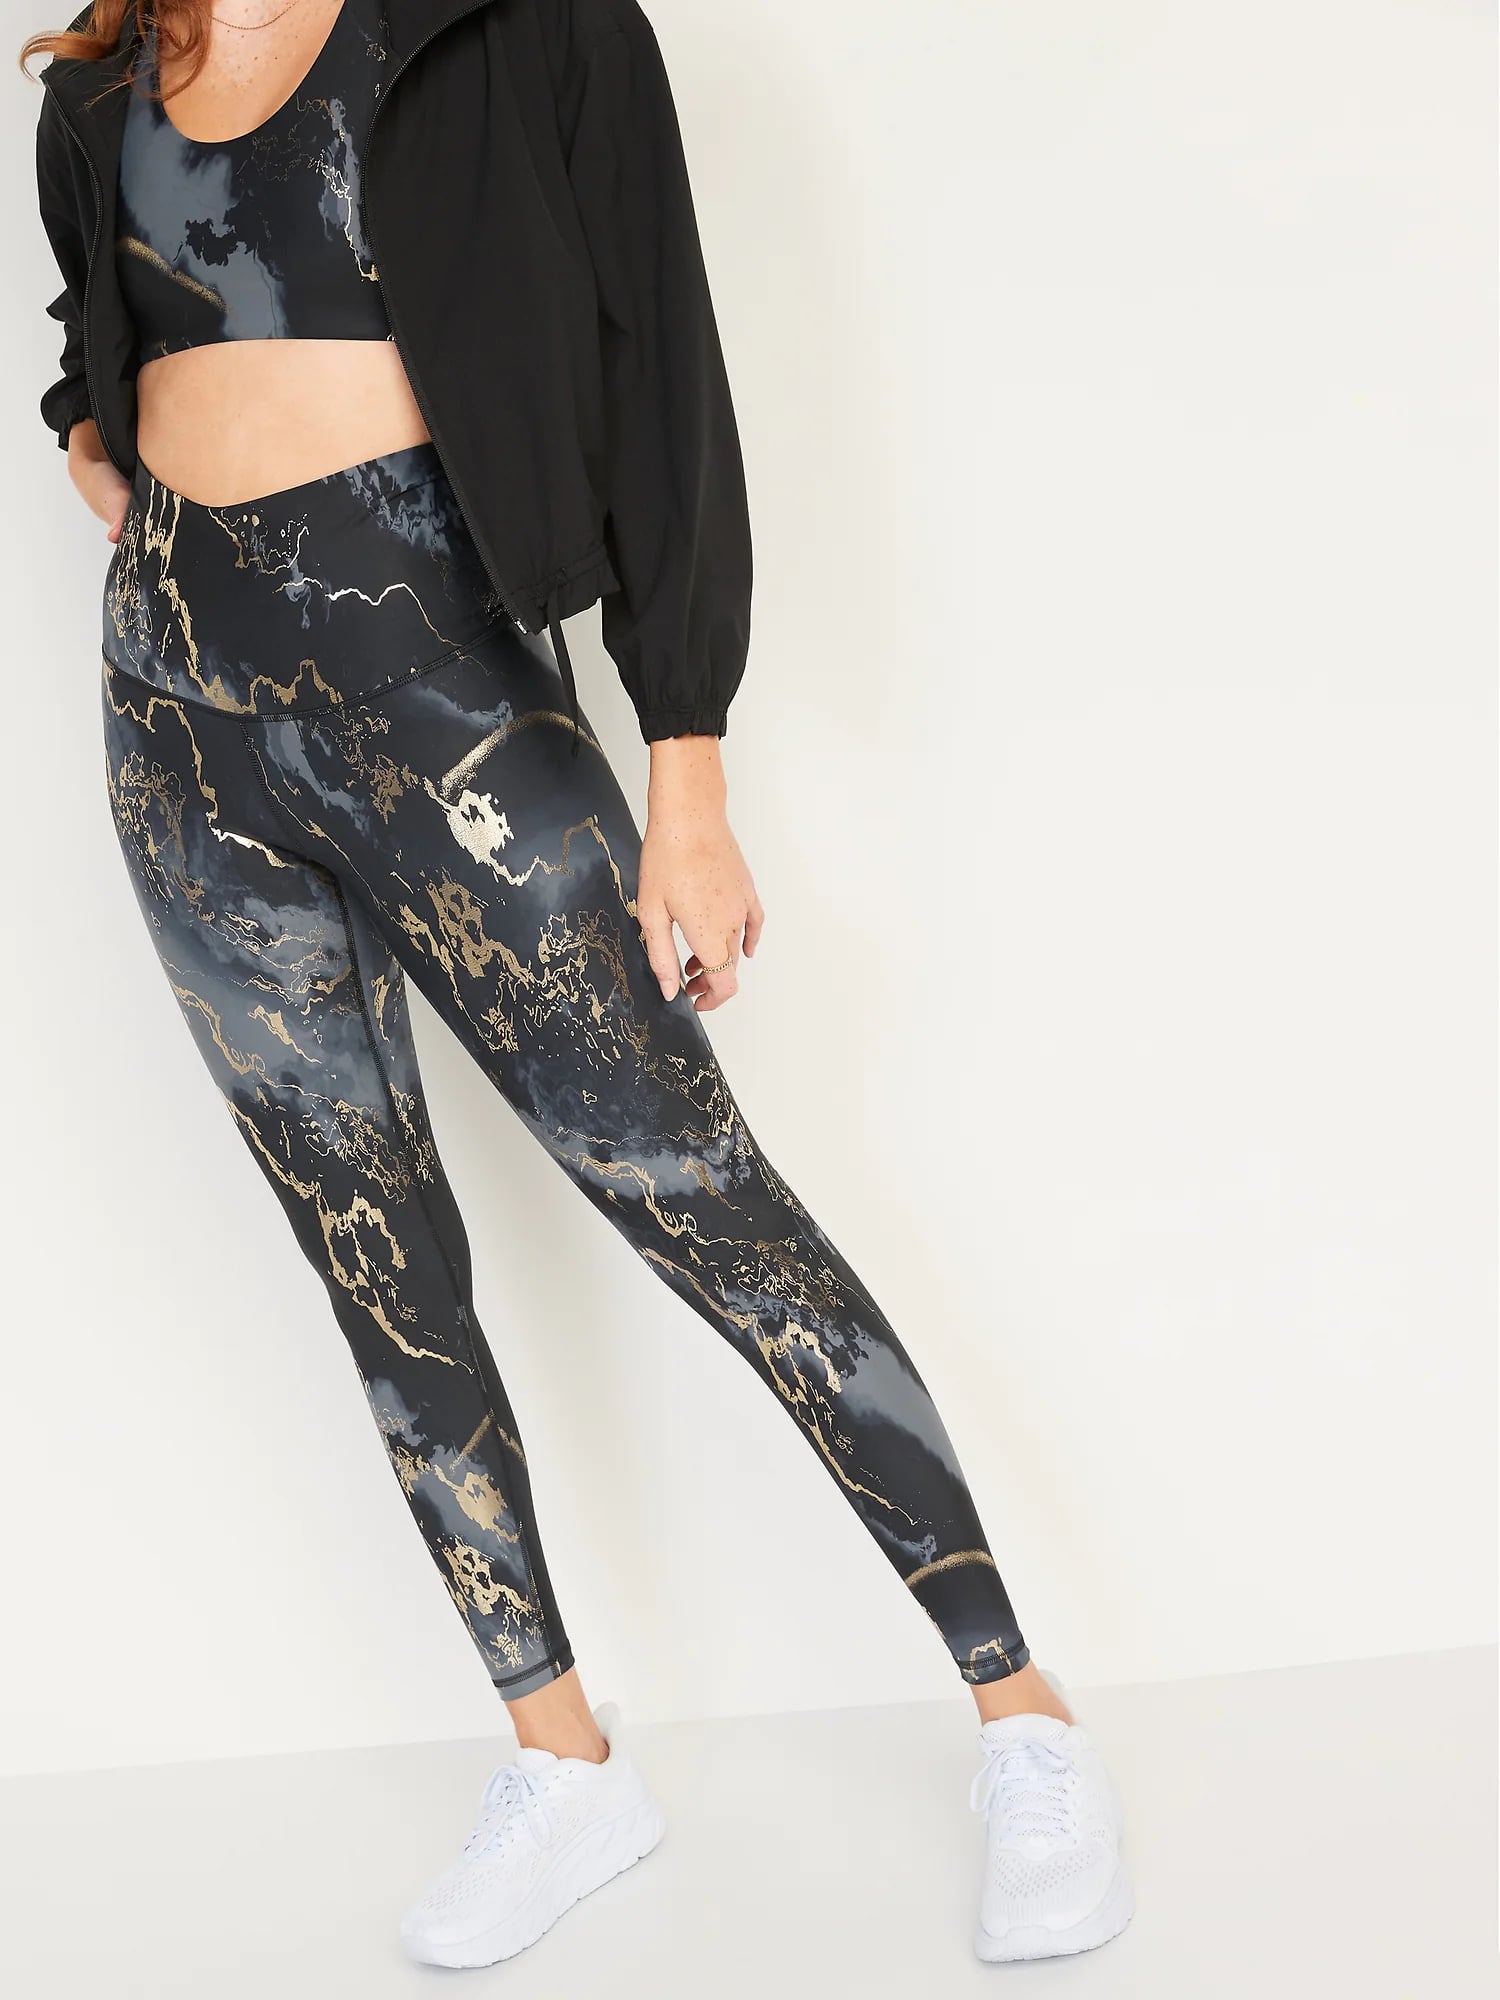 Old Navy Extra High-Waisted PowerSoft Leggings Black gold